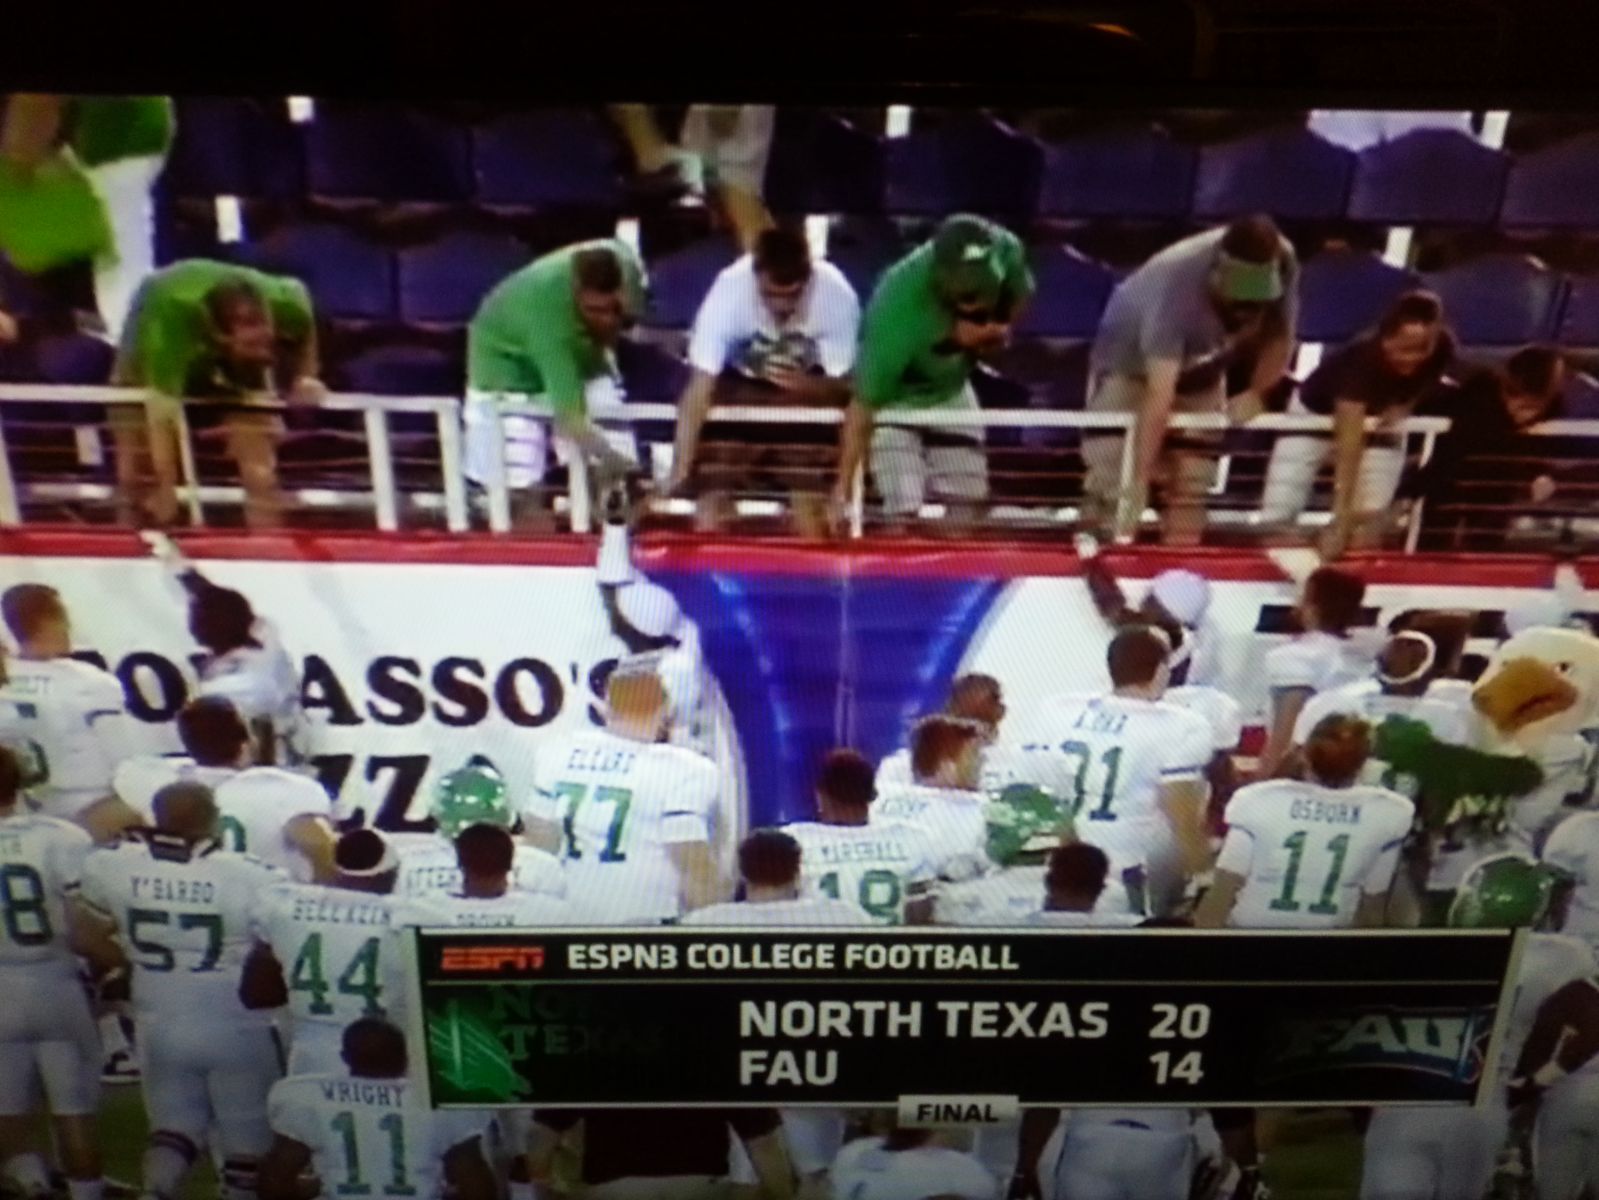 UNT Players shake fans hands after win @FAU